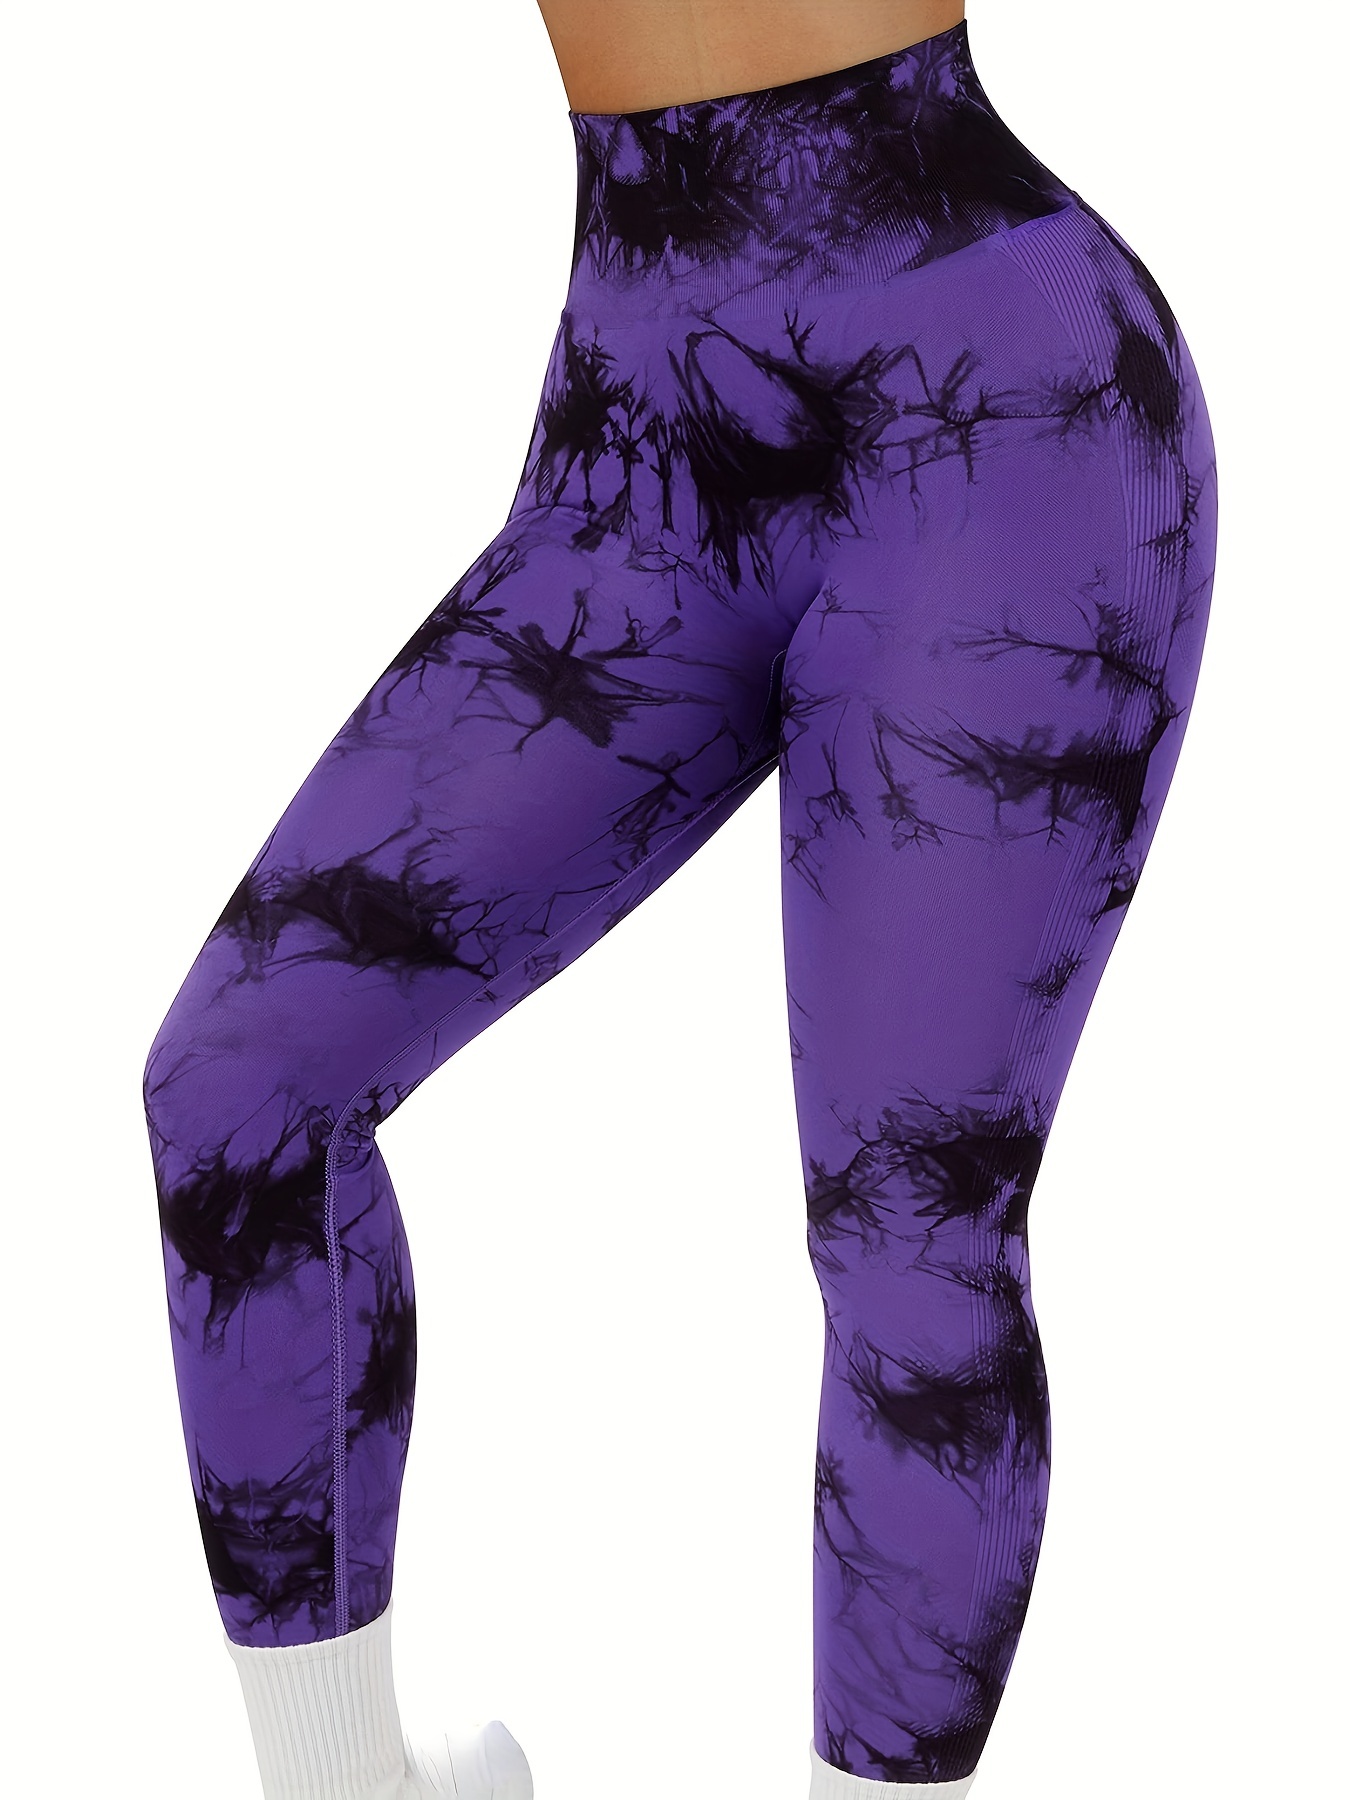 Ritualay Ladies Bottoms Solid Color Leggings Gym Stretch Yoga Pants Boot Cut  Staight Trousers Purple XL 